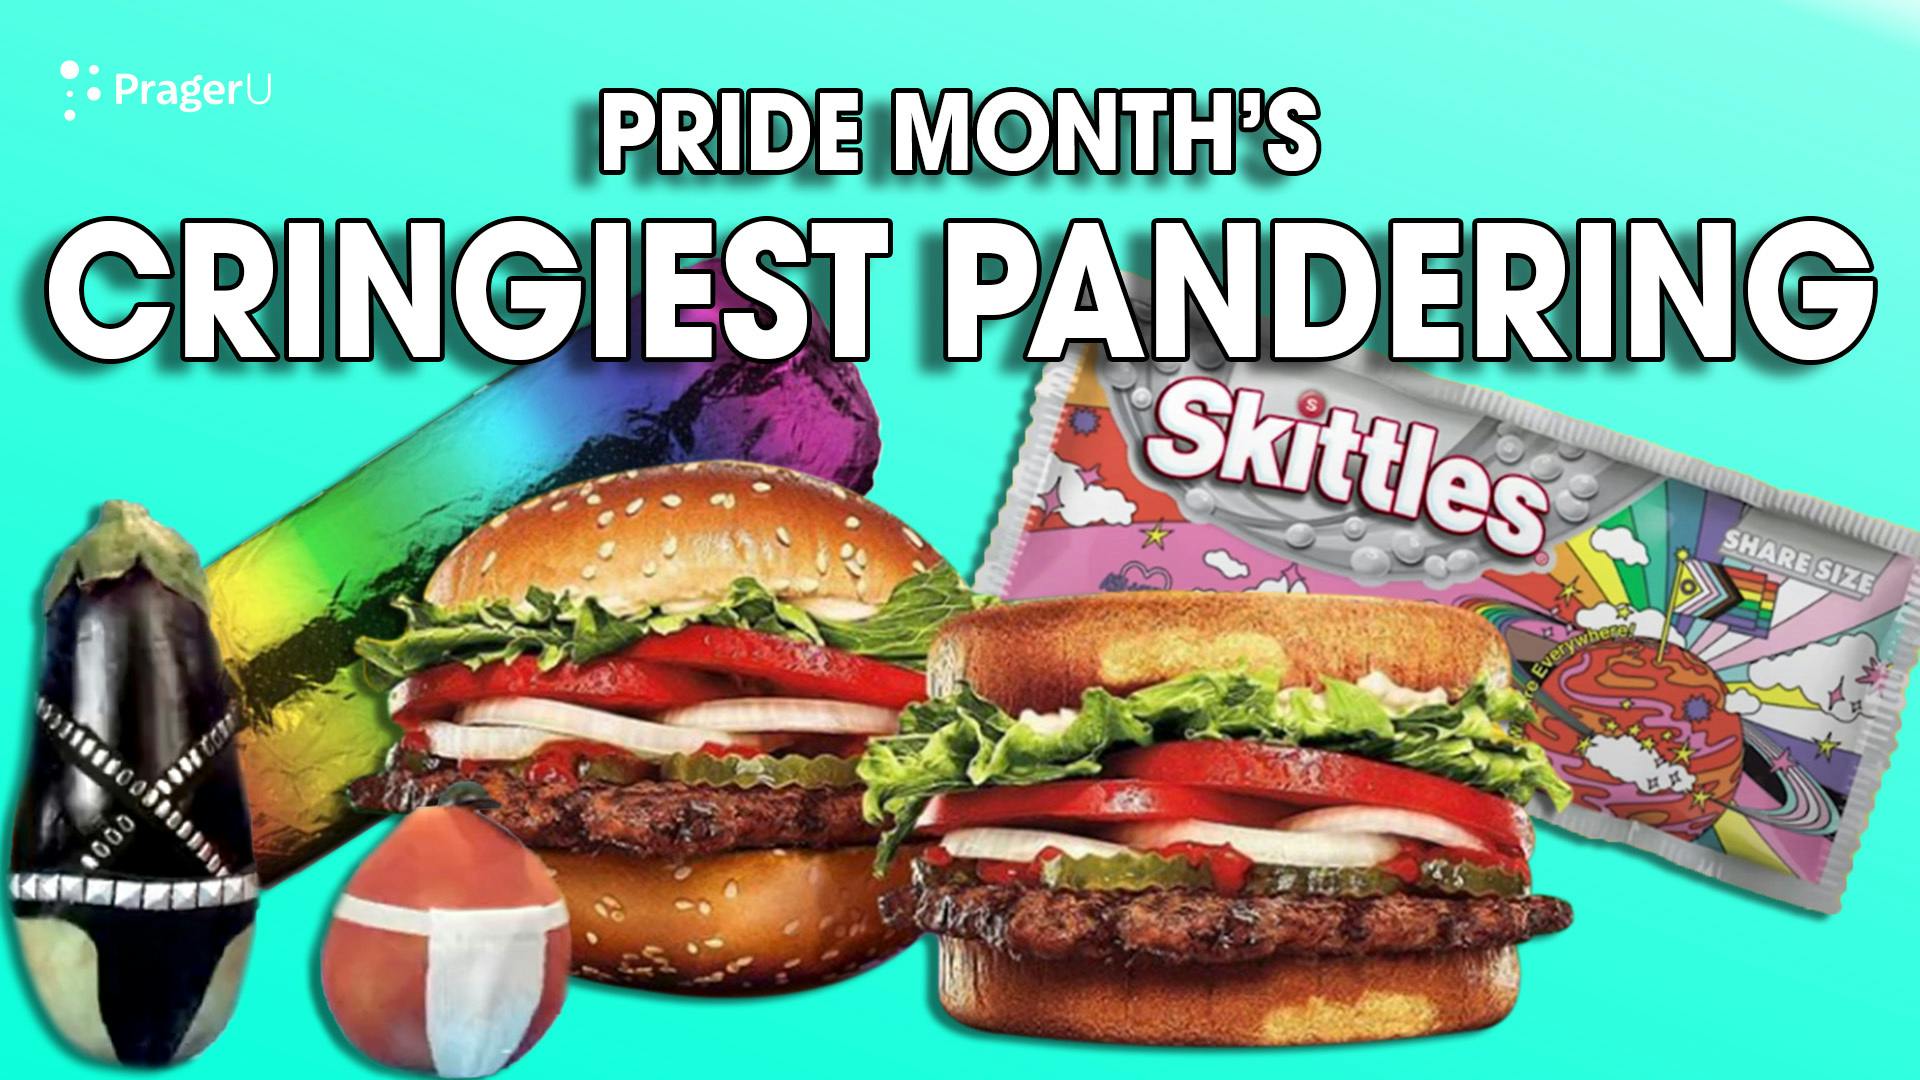 The Top 10 Most Cringey Examples of Corporate Pride Pandering: 6/14/2022